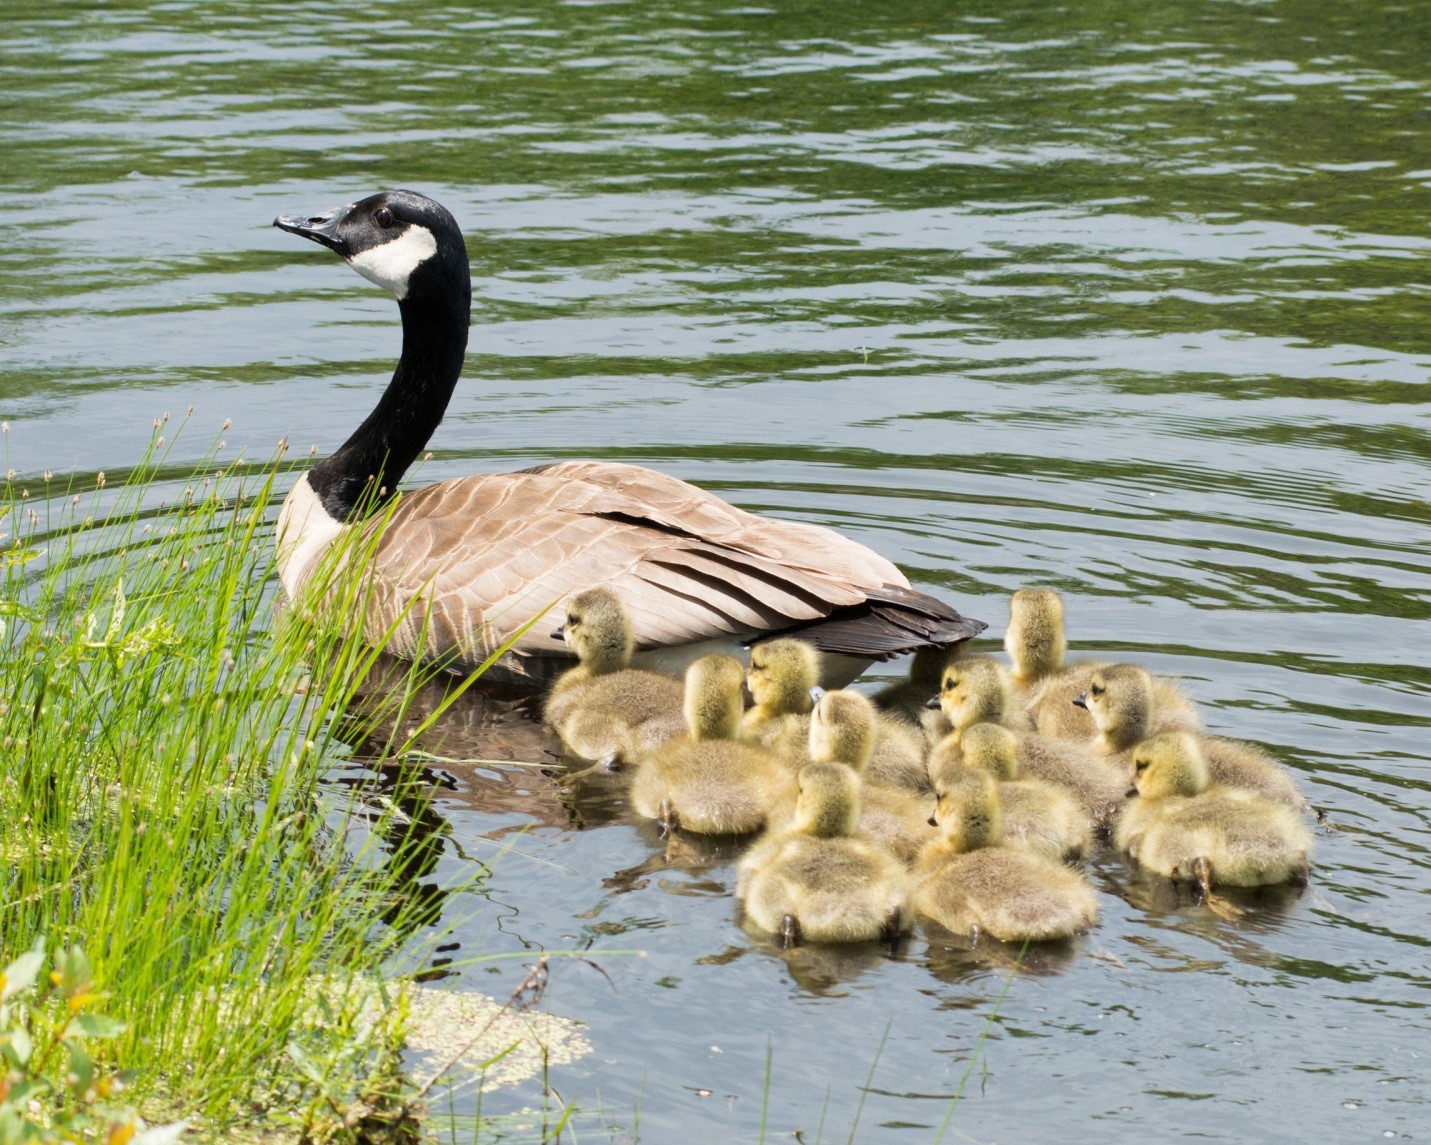 Lawful Methods to Discourage Canadian Geese from Your Property